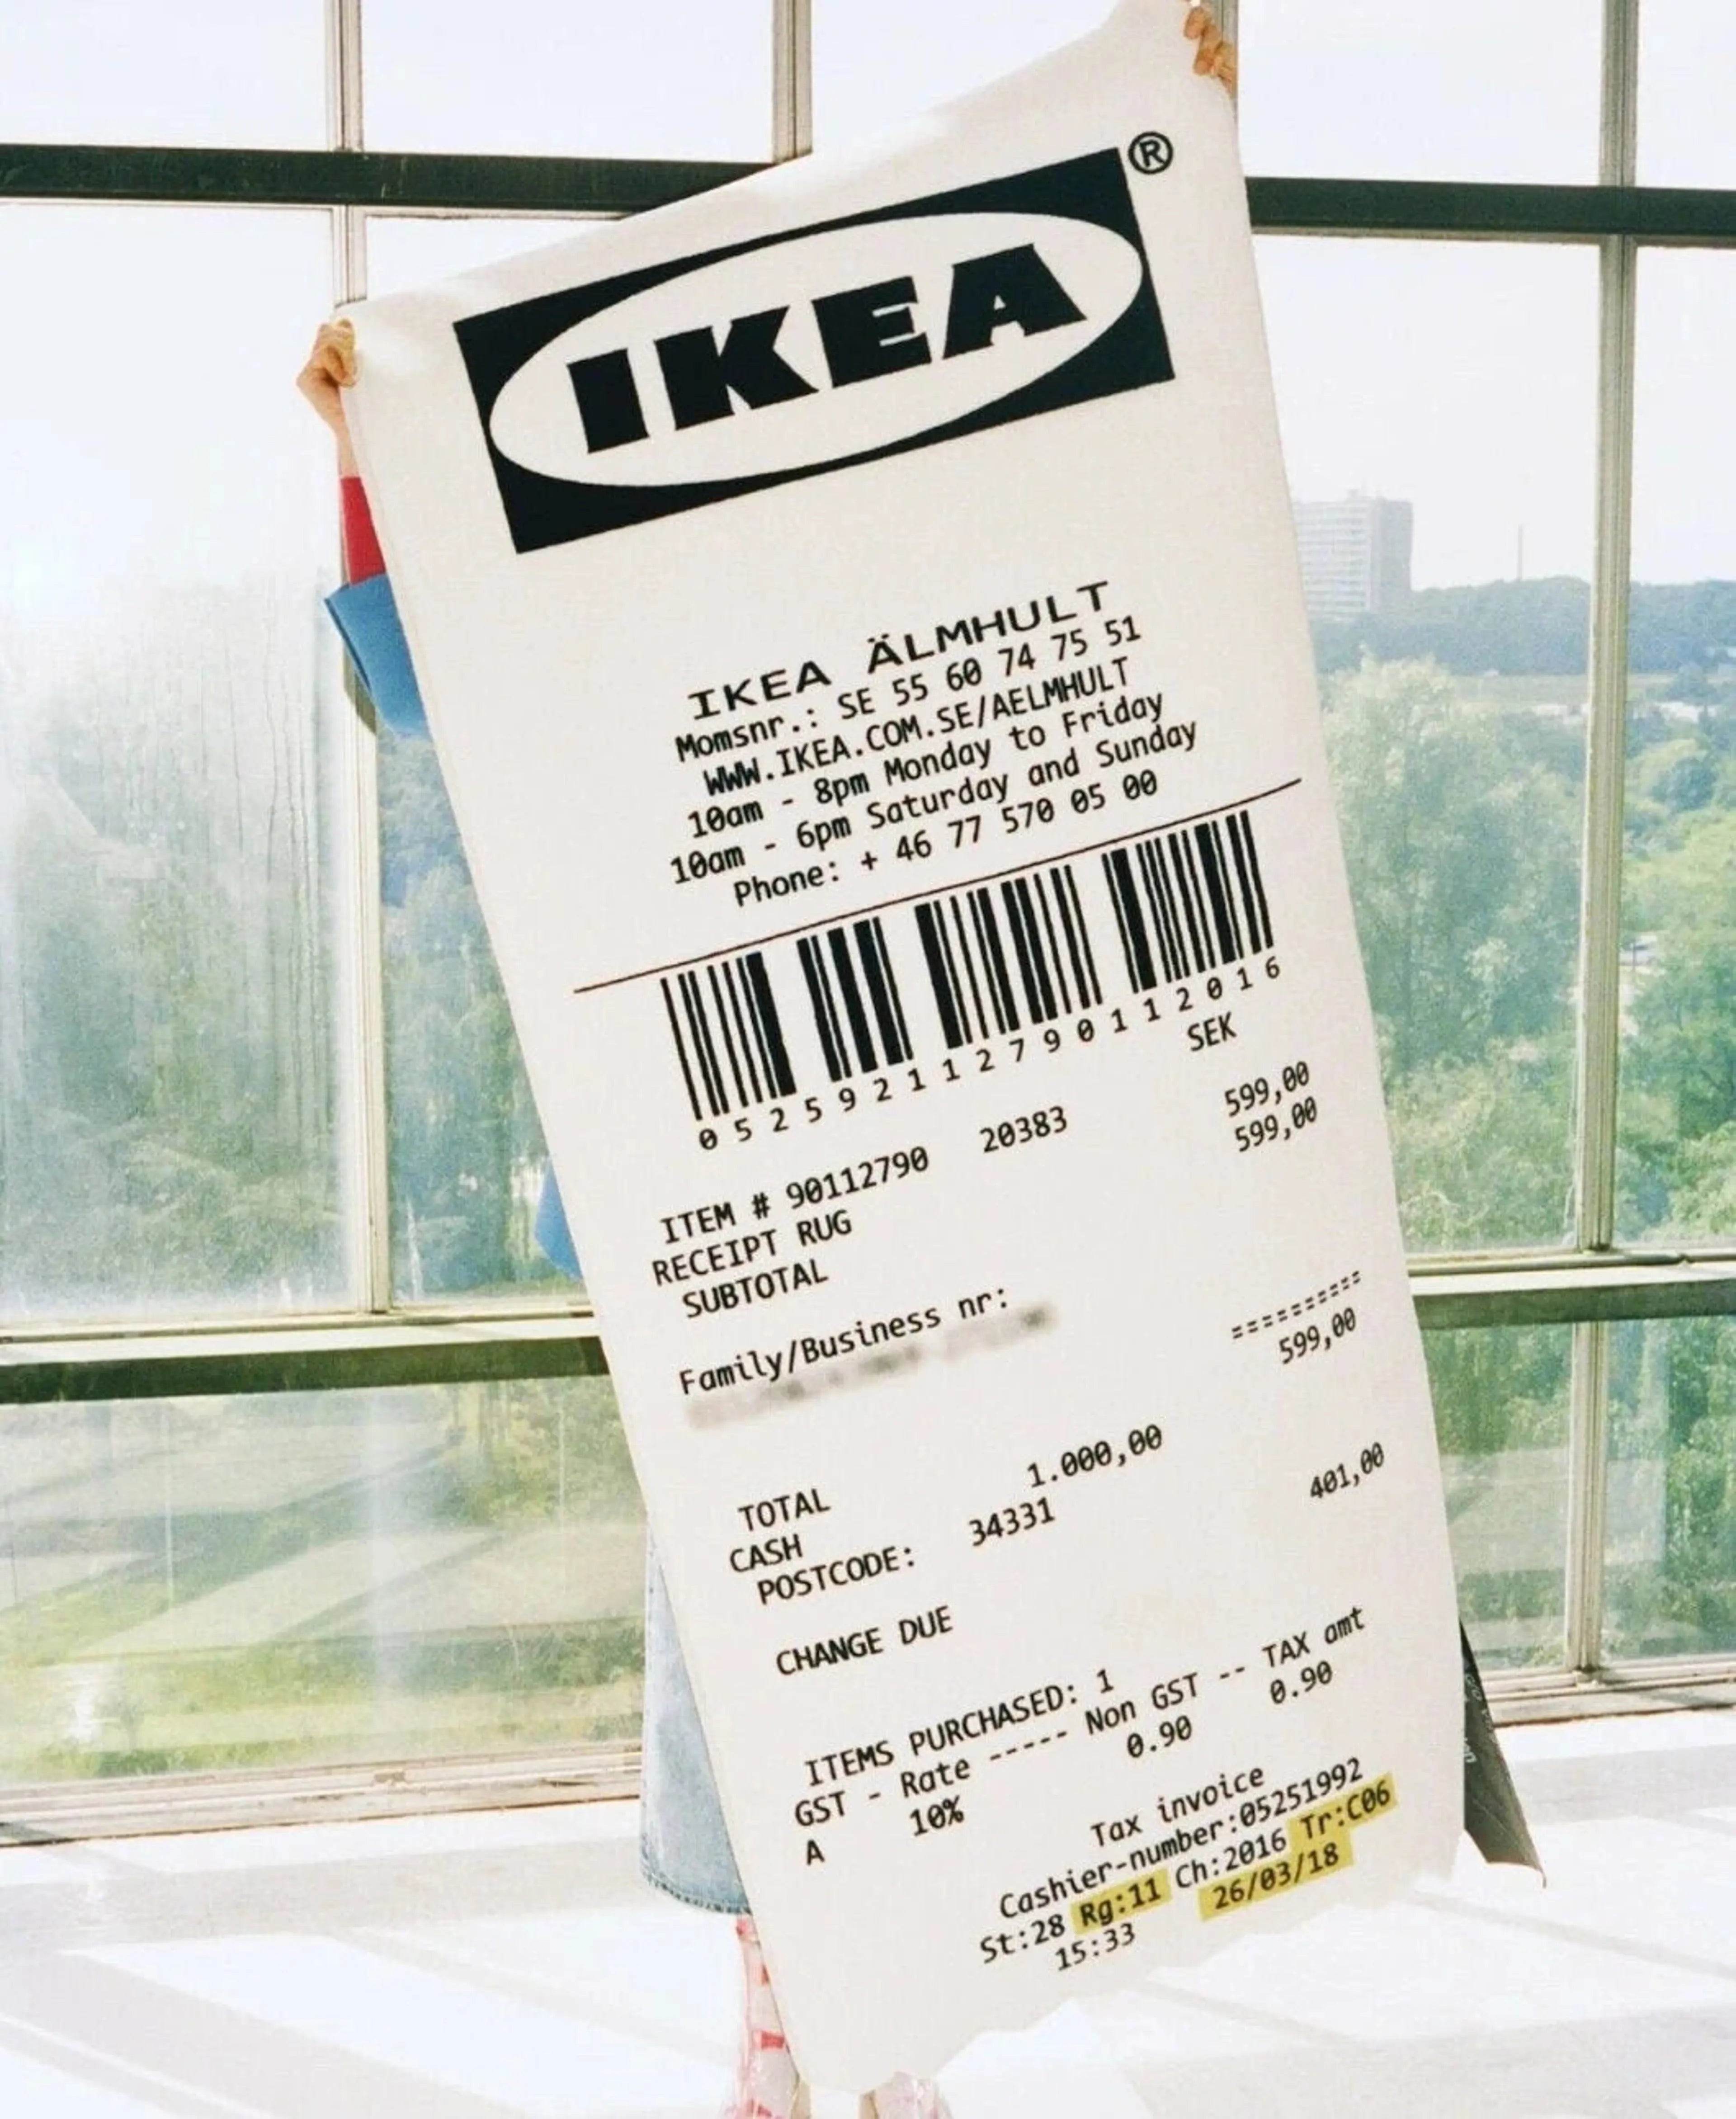 OFF WHITE (Design by Virgil Abloh) x IKEA 2019 “MARKERAD” — Dylan